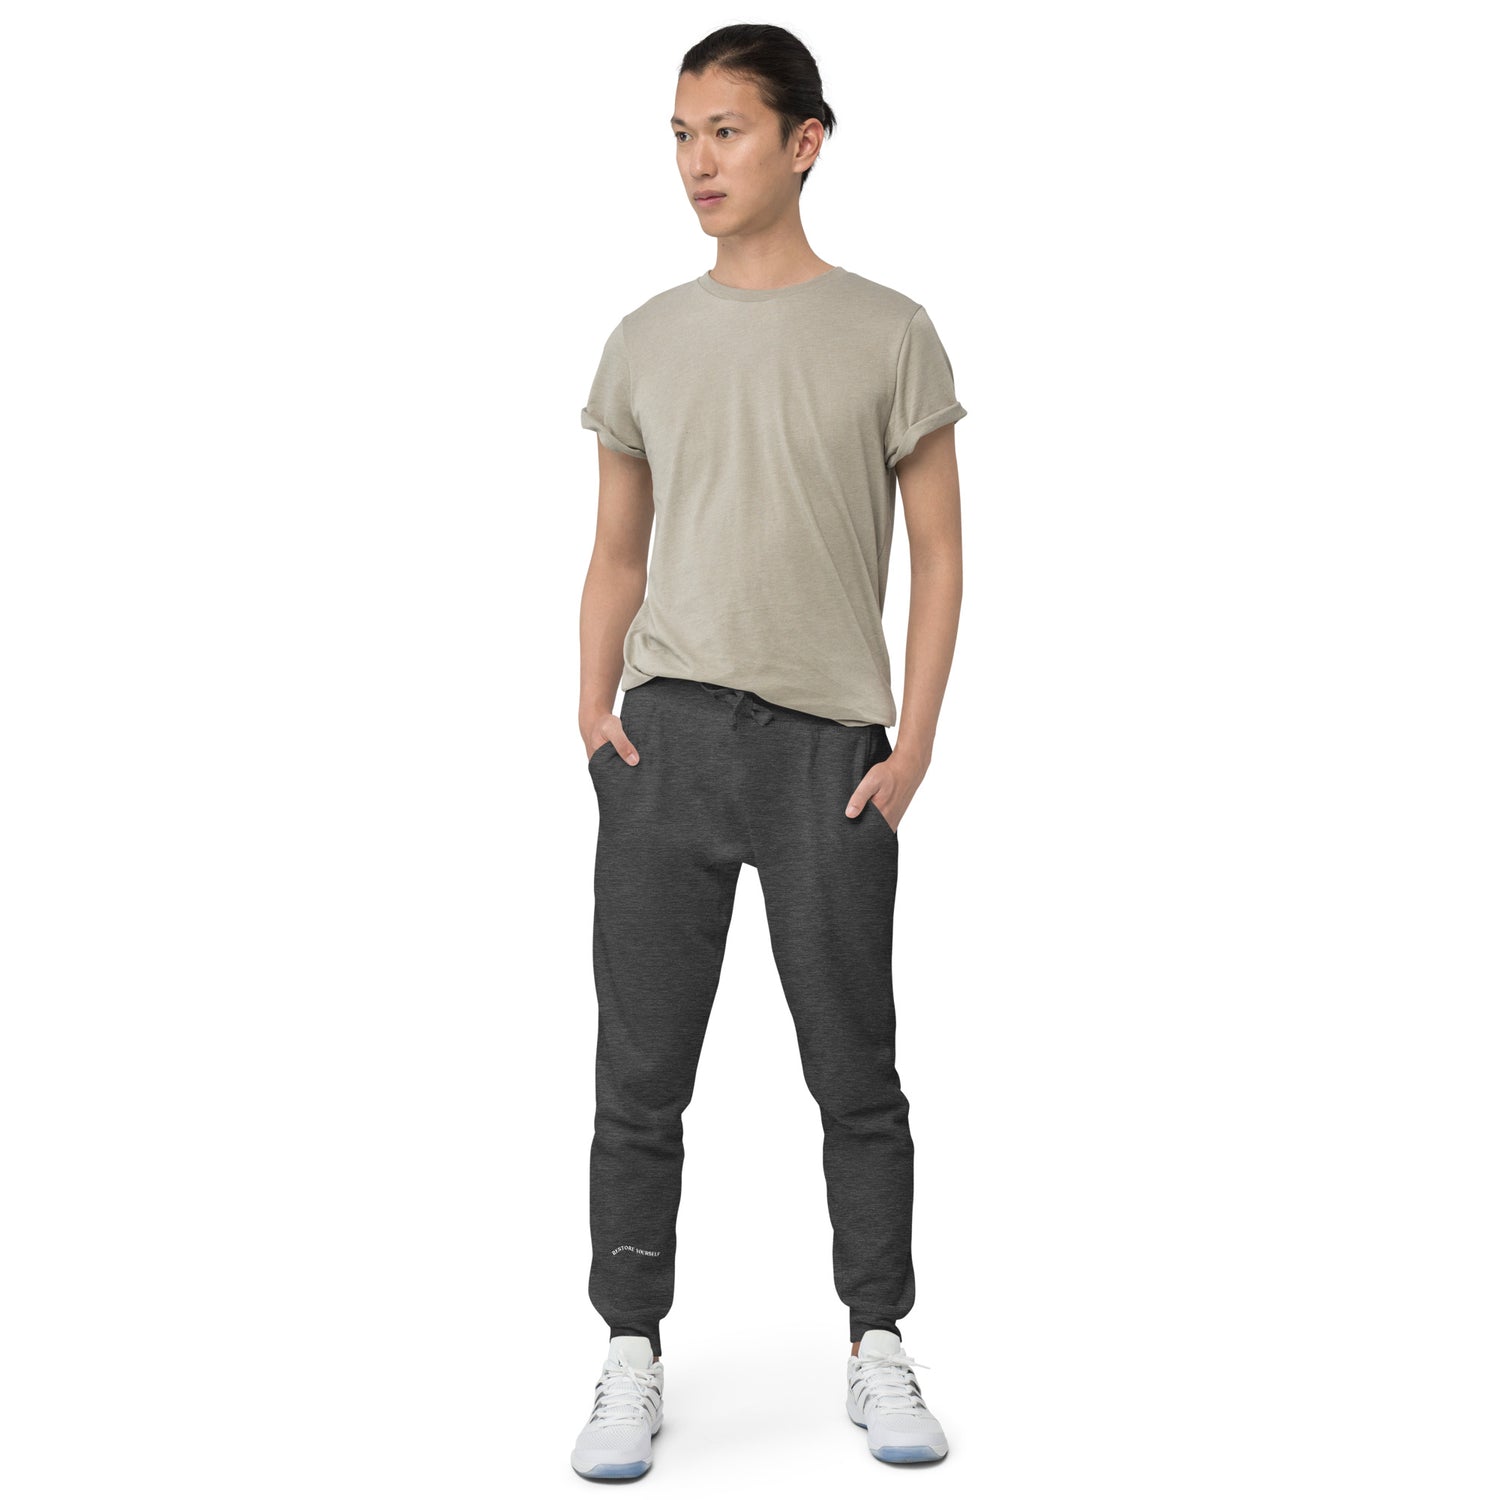 Charcoal Sweat pant with "Restore Yourself" printed on right lower leg.